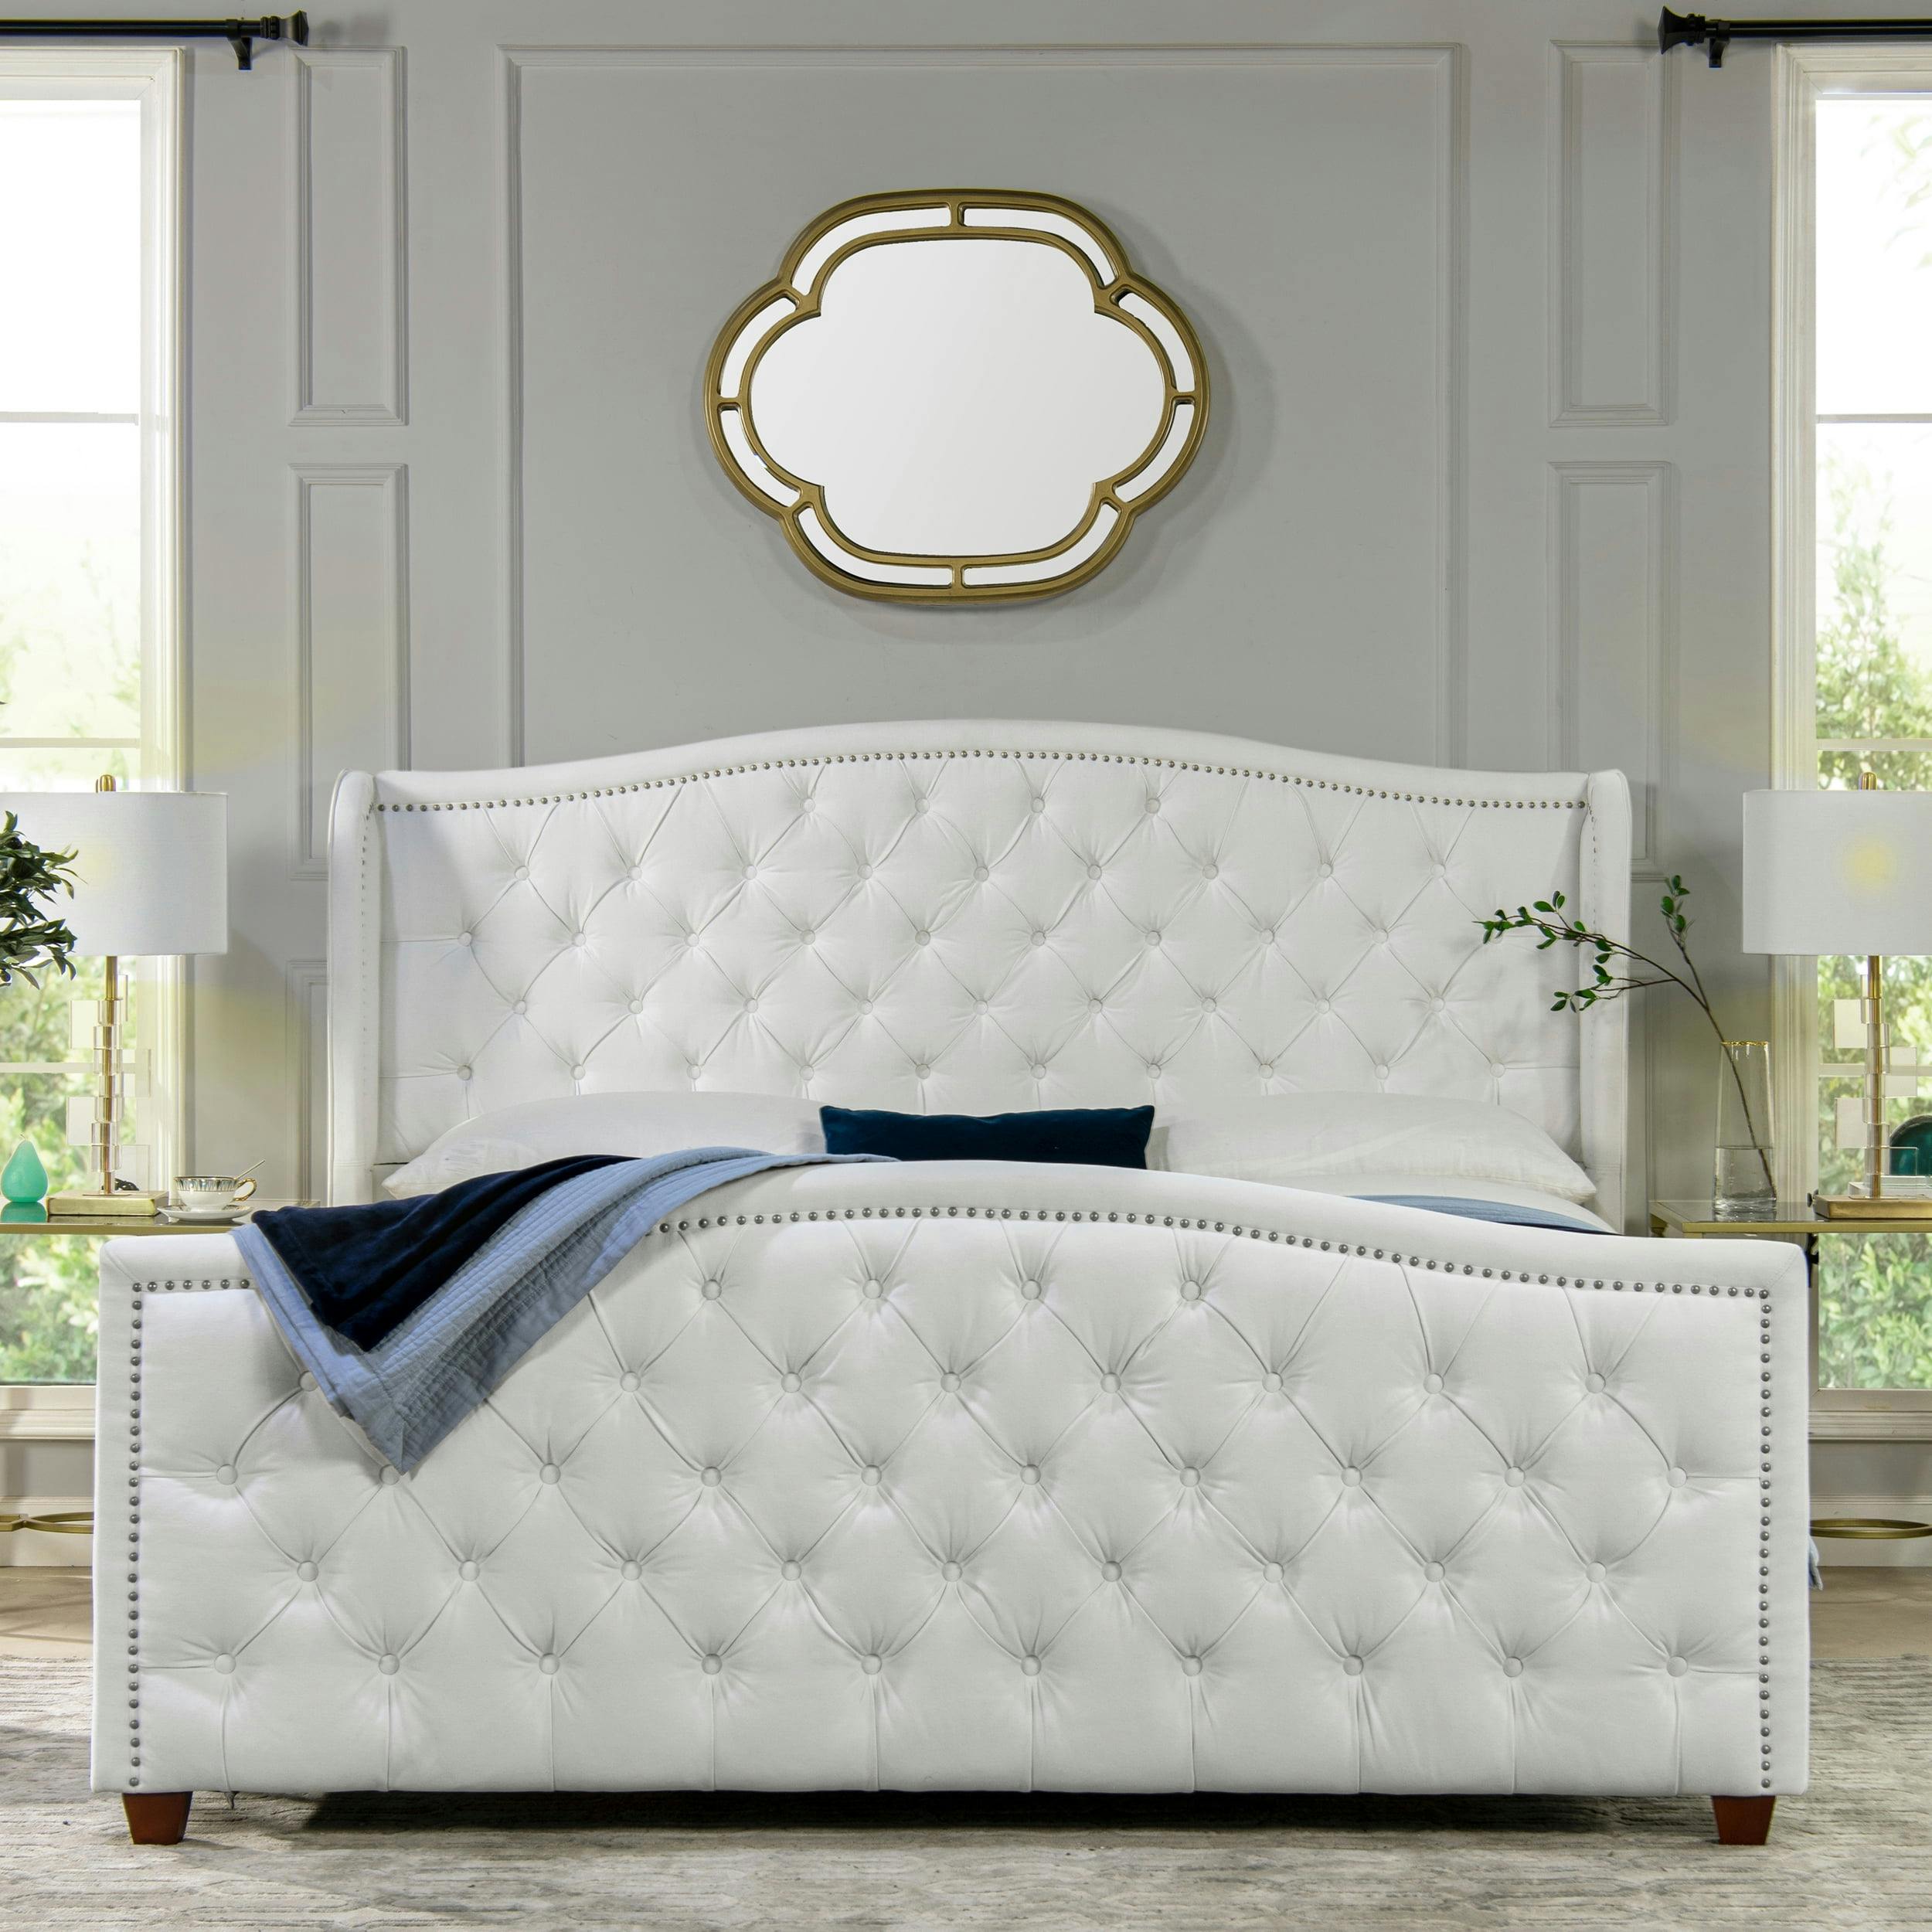 Elegant King-Sized Birch Wood Frame Bed with Tufted Polyester Upholstery